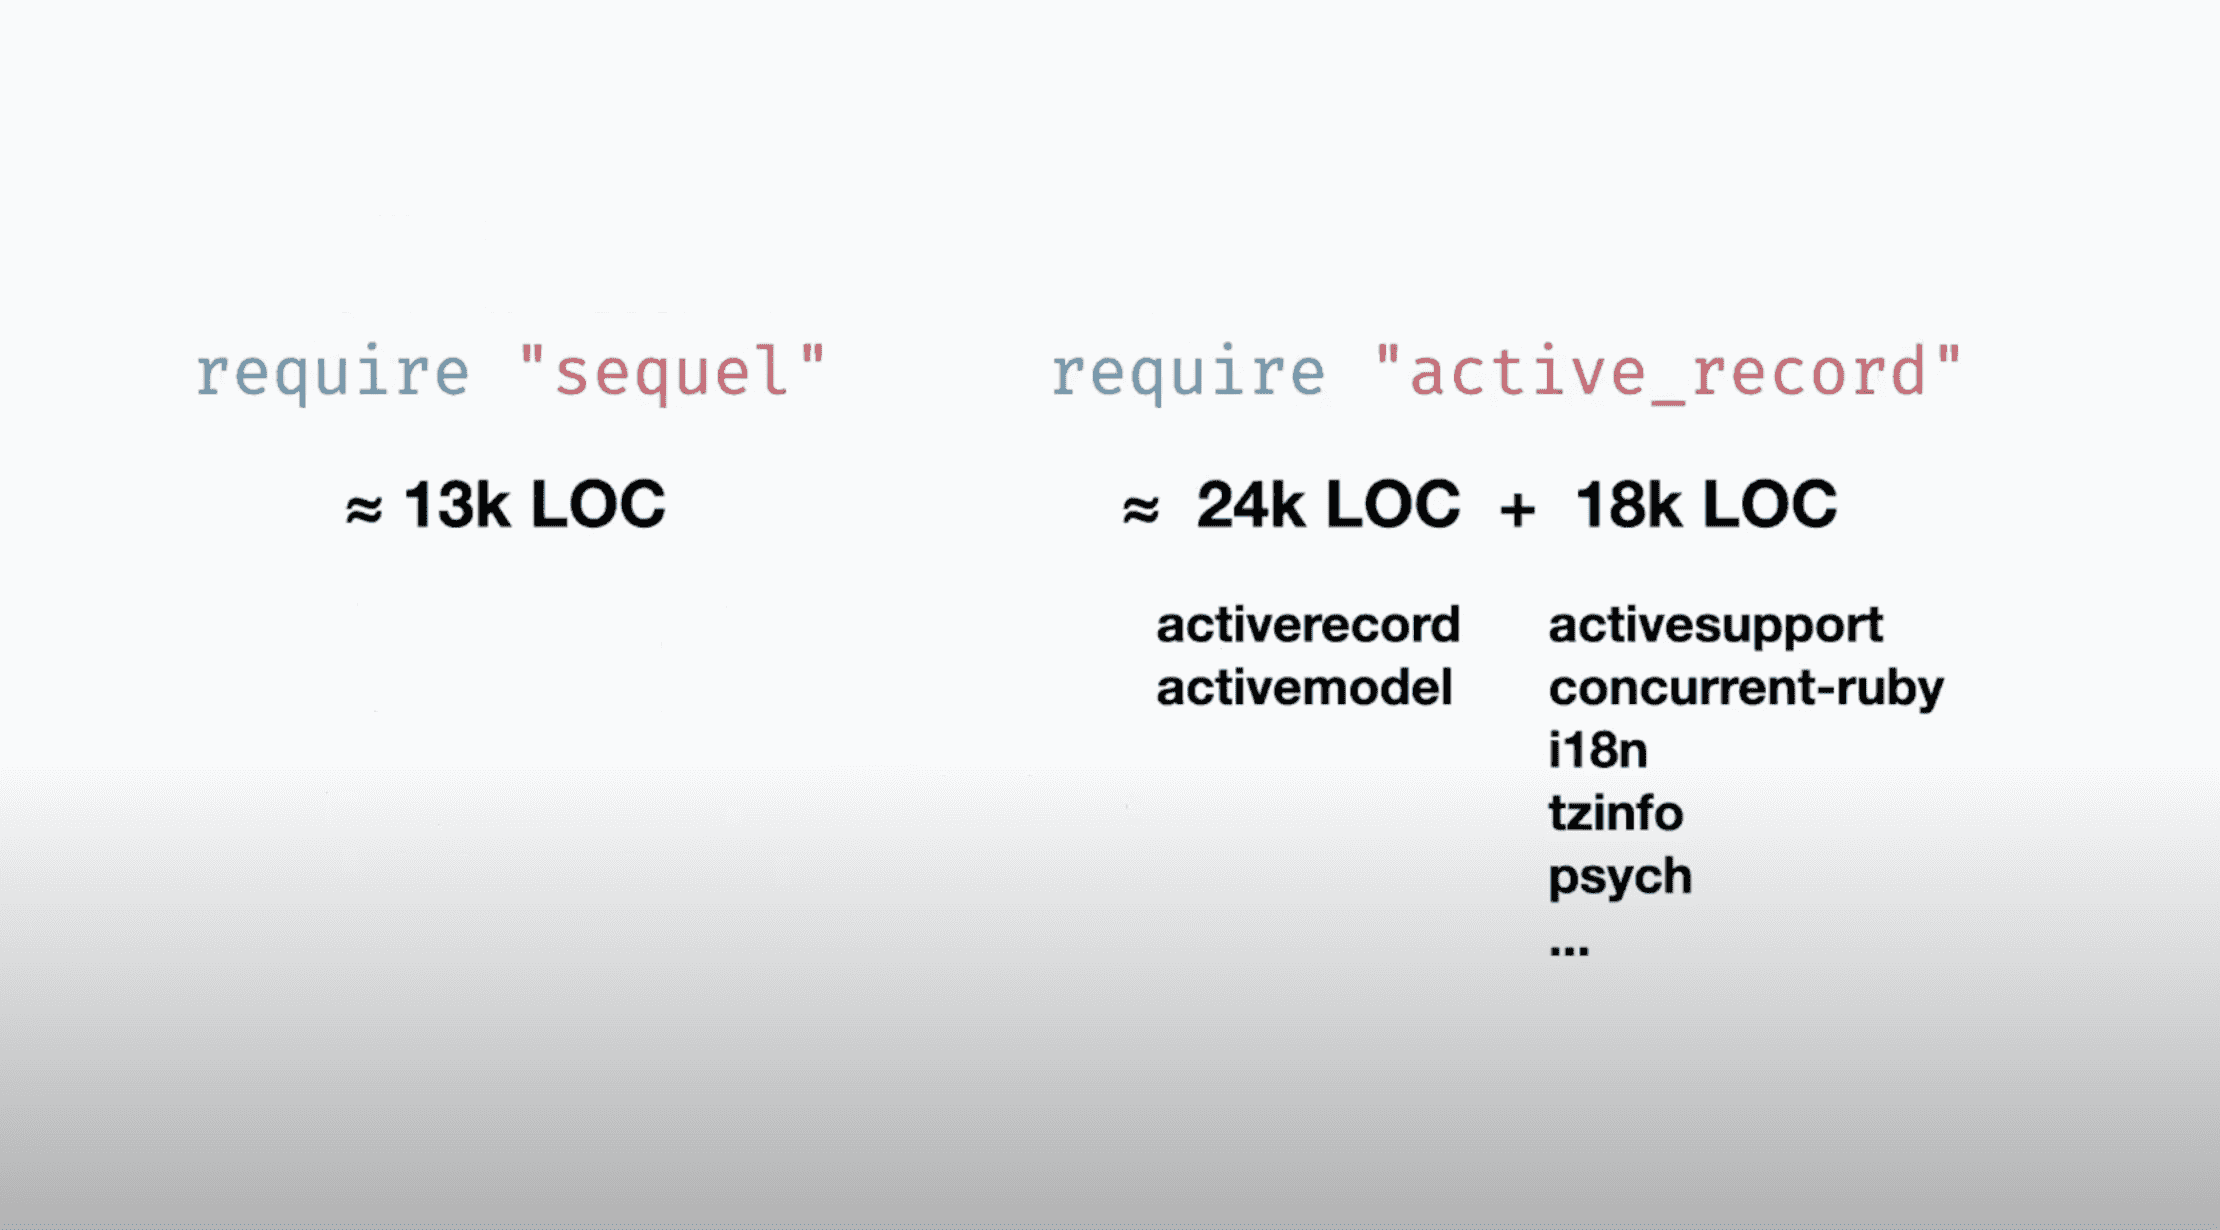 ActiveRecord and Sequel weight comparison (SRC: https://youtu.be/ftJrBpiYQXM)